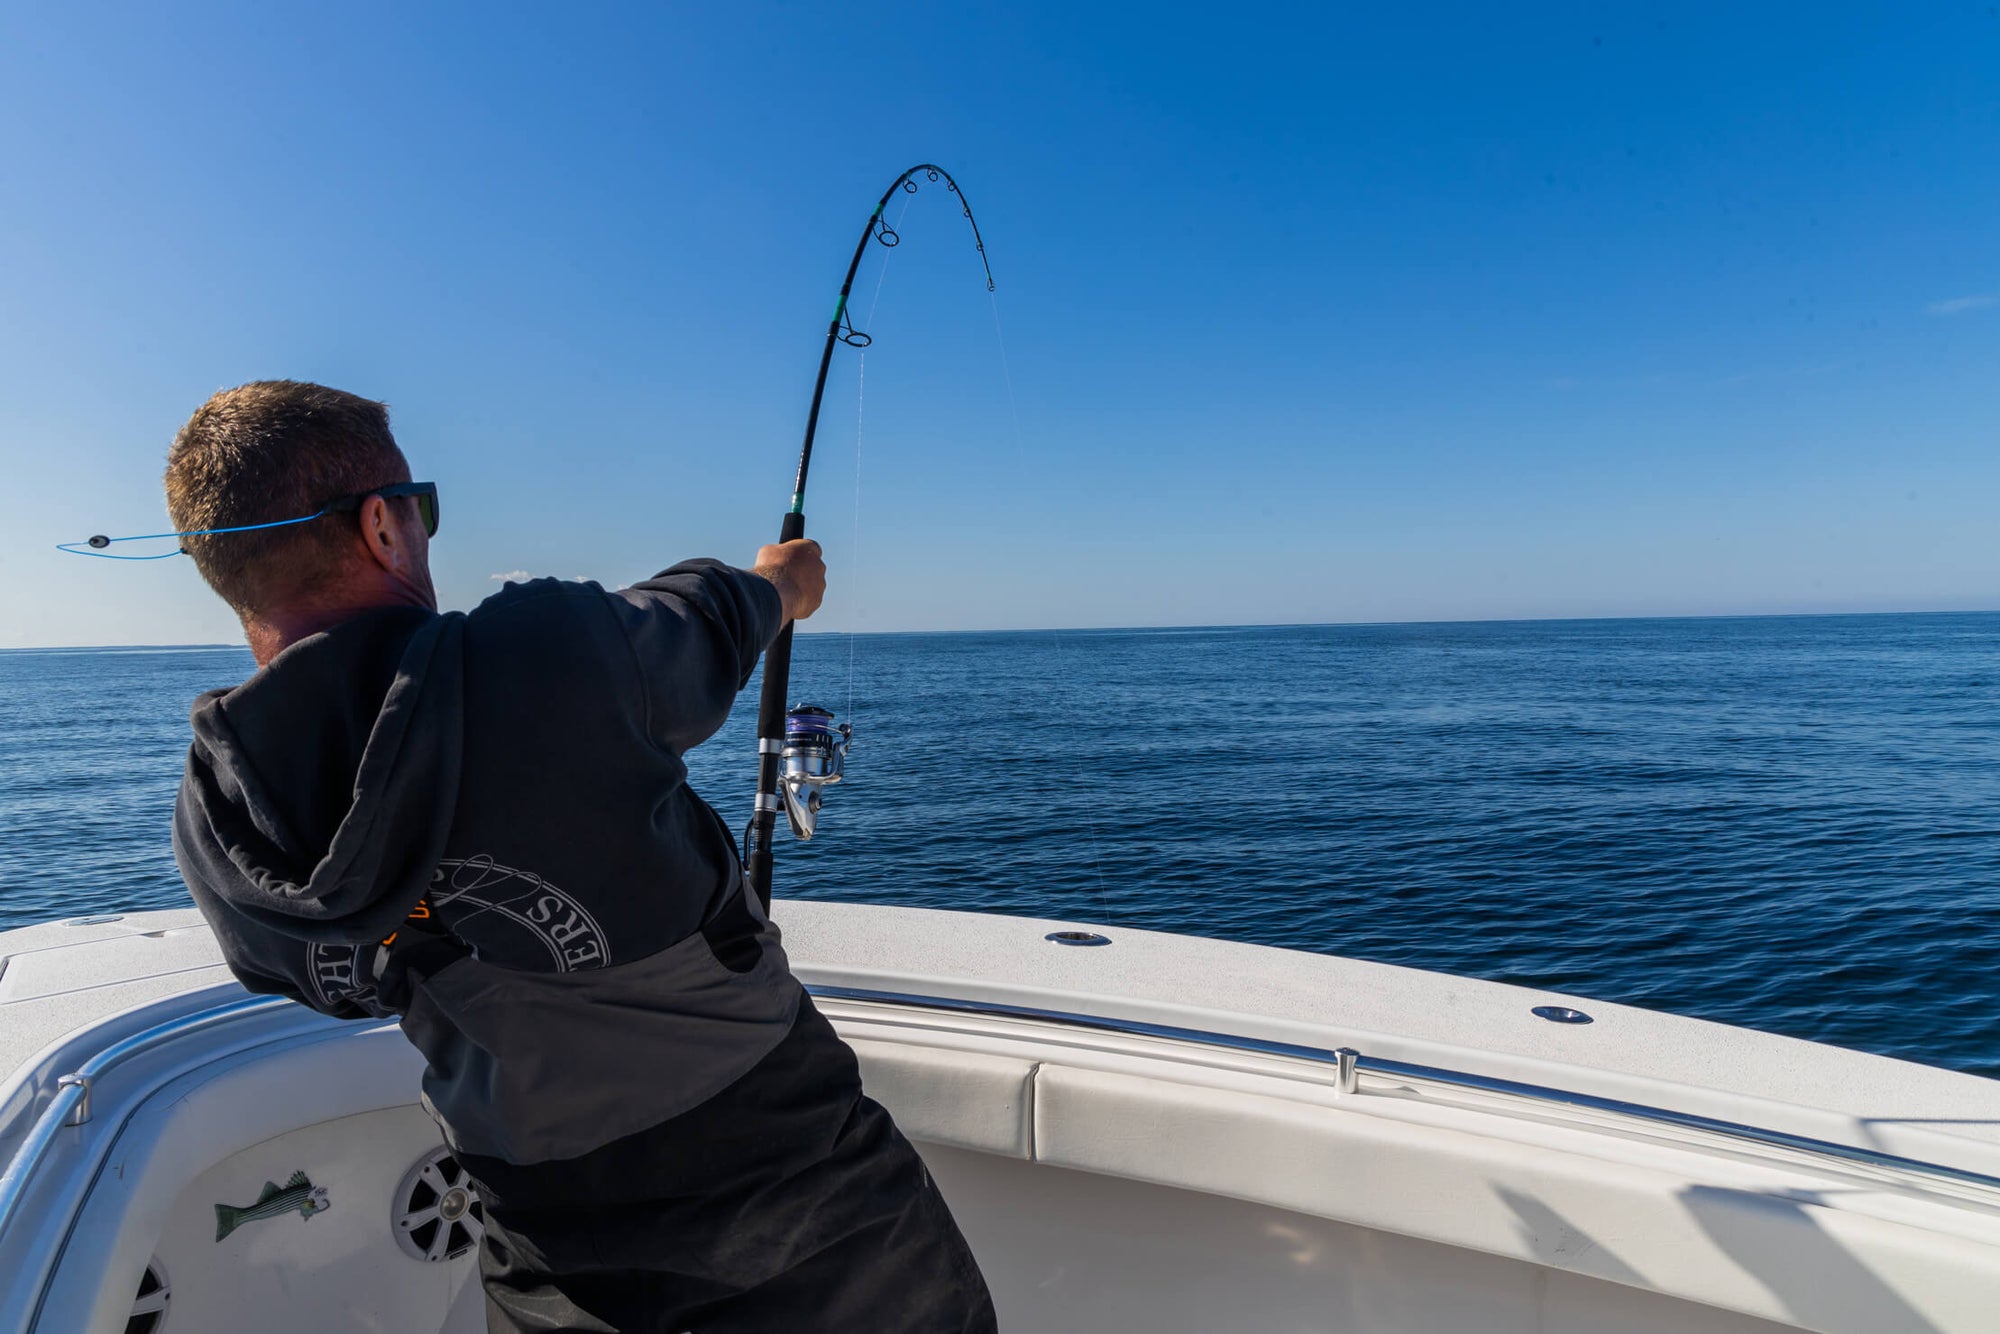 An angler is standing on a boat and reeling in his fishing line 